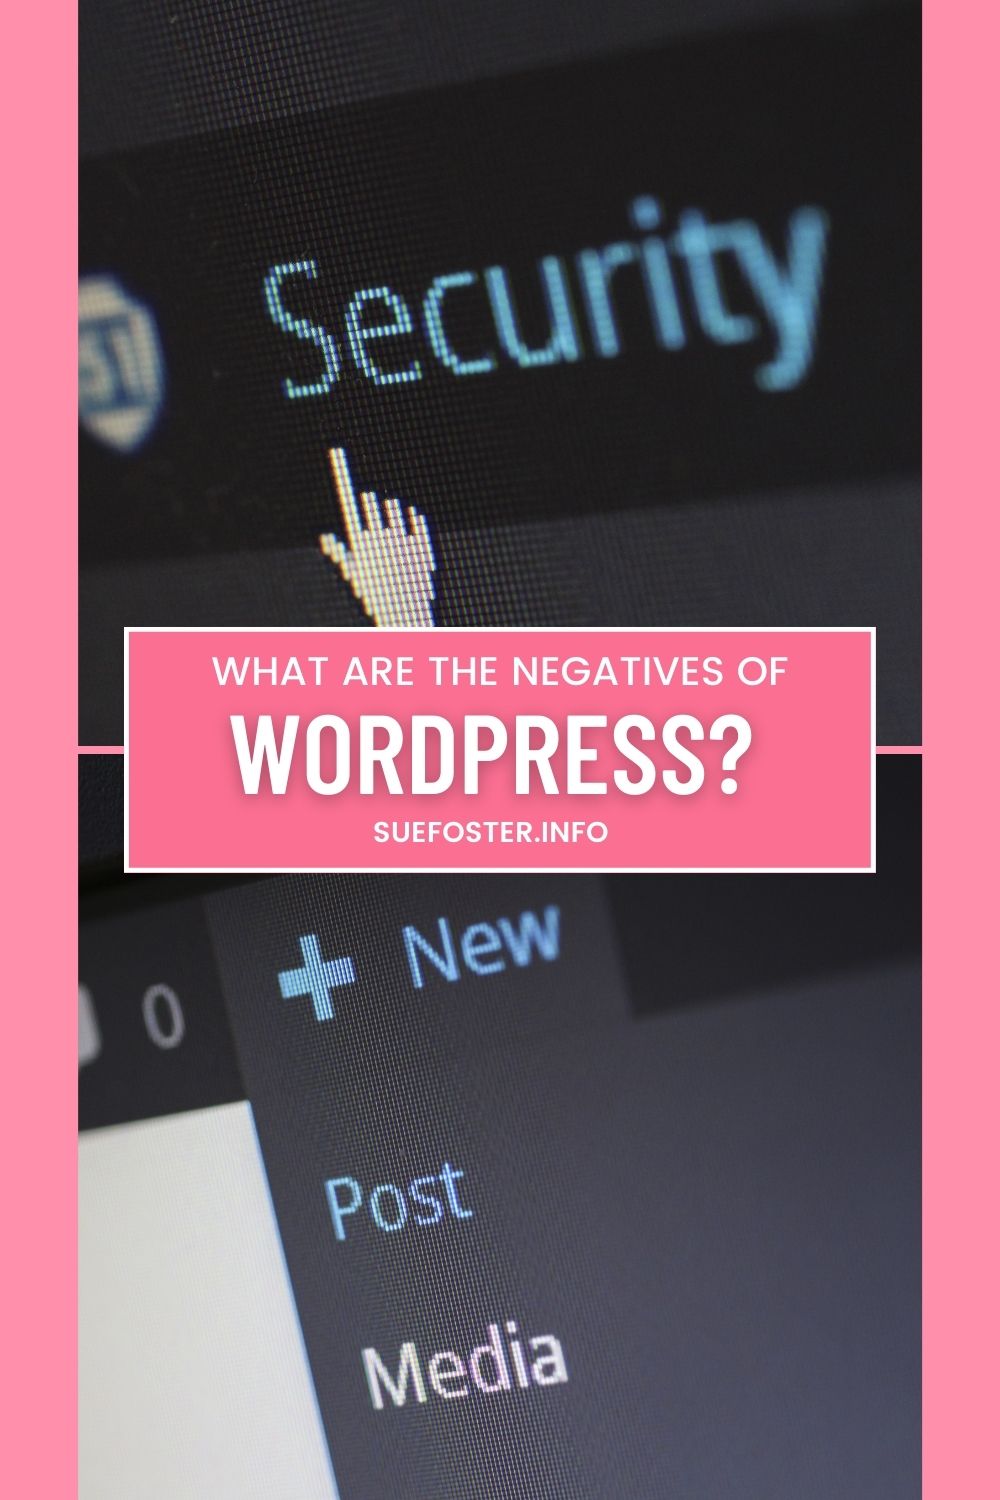 Explore the negatives of WordPress: From security concerns to SEO challenges, learn how to make the most of this popular CMS platform.